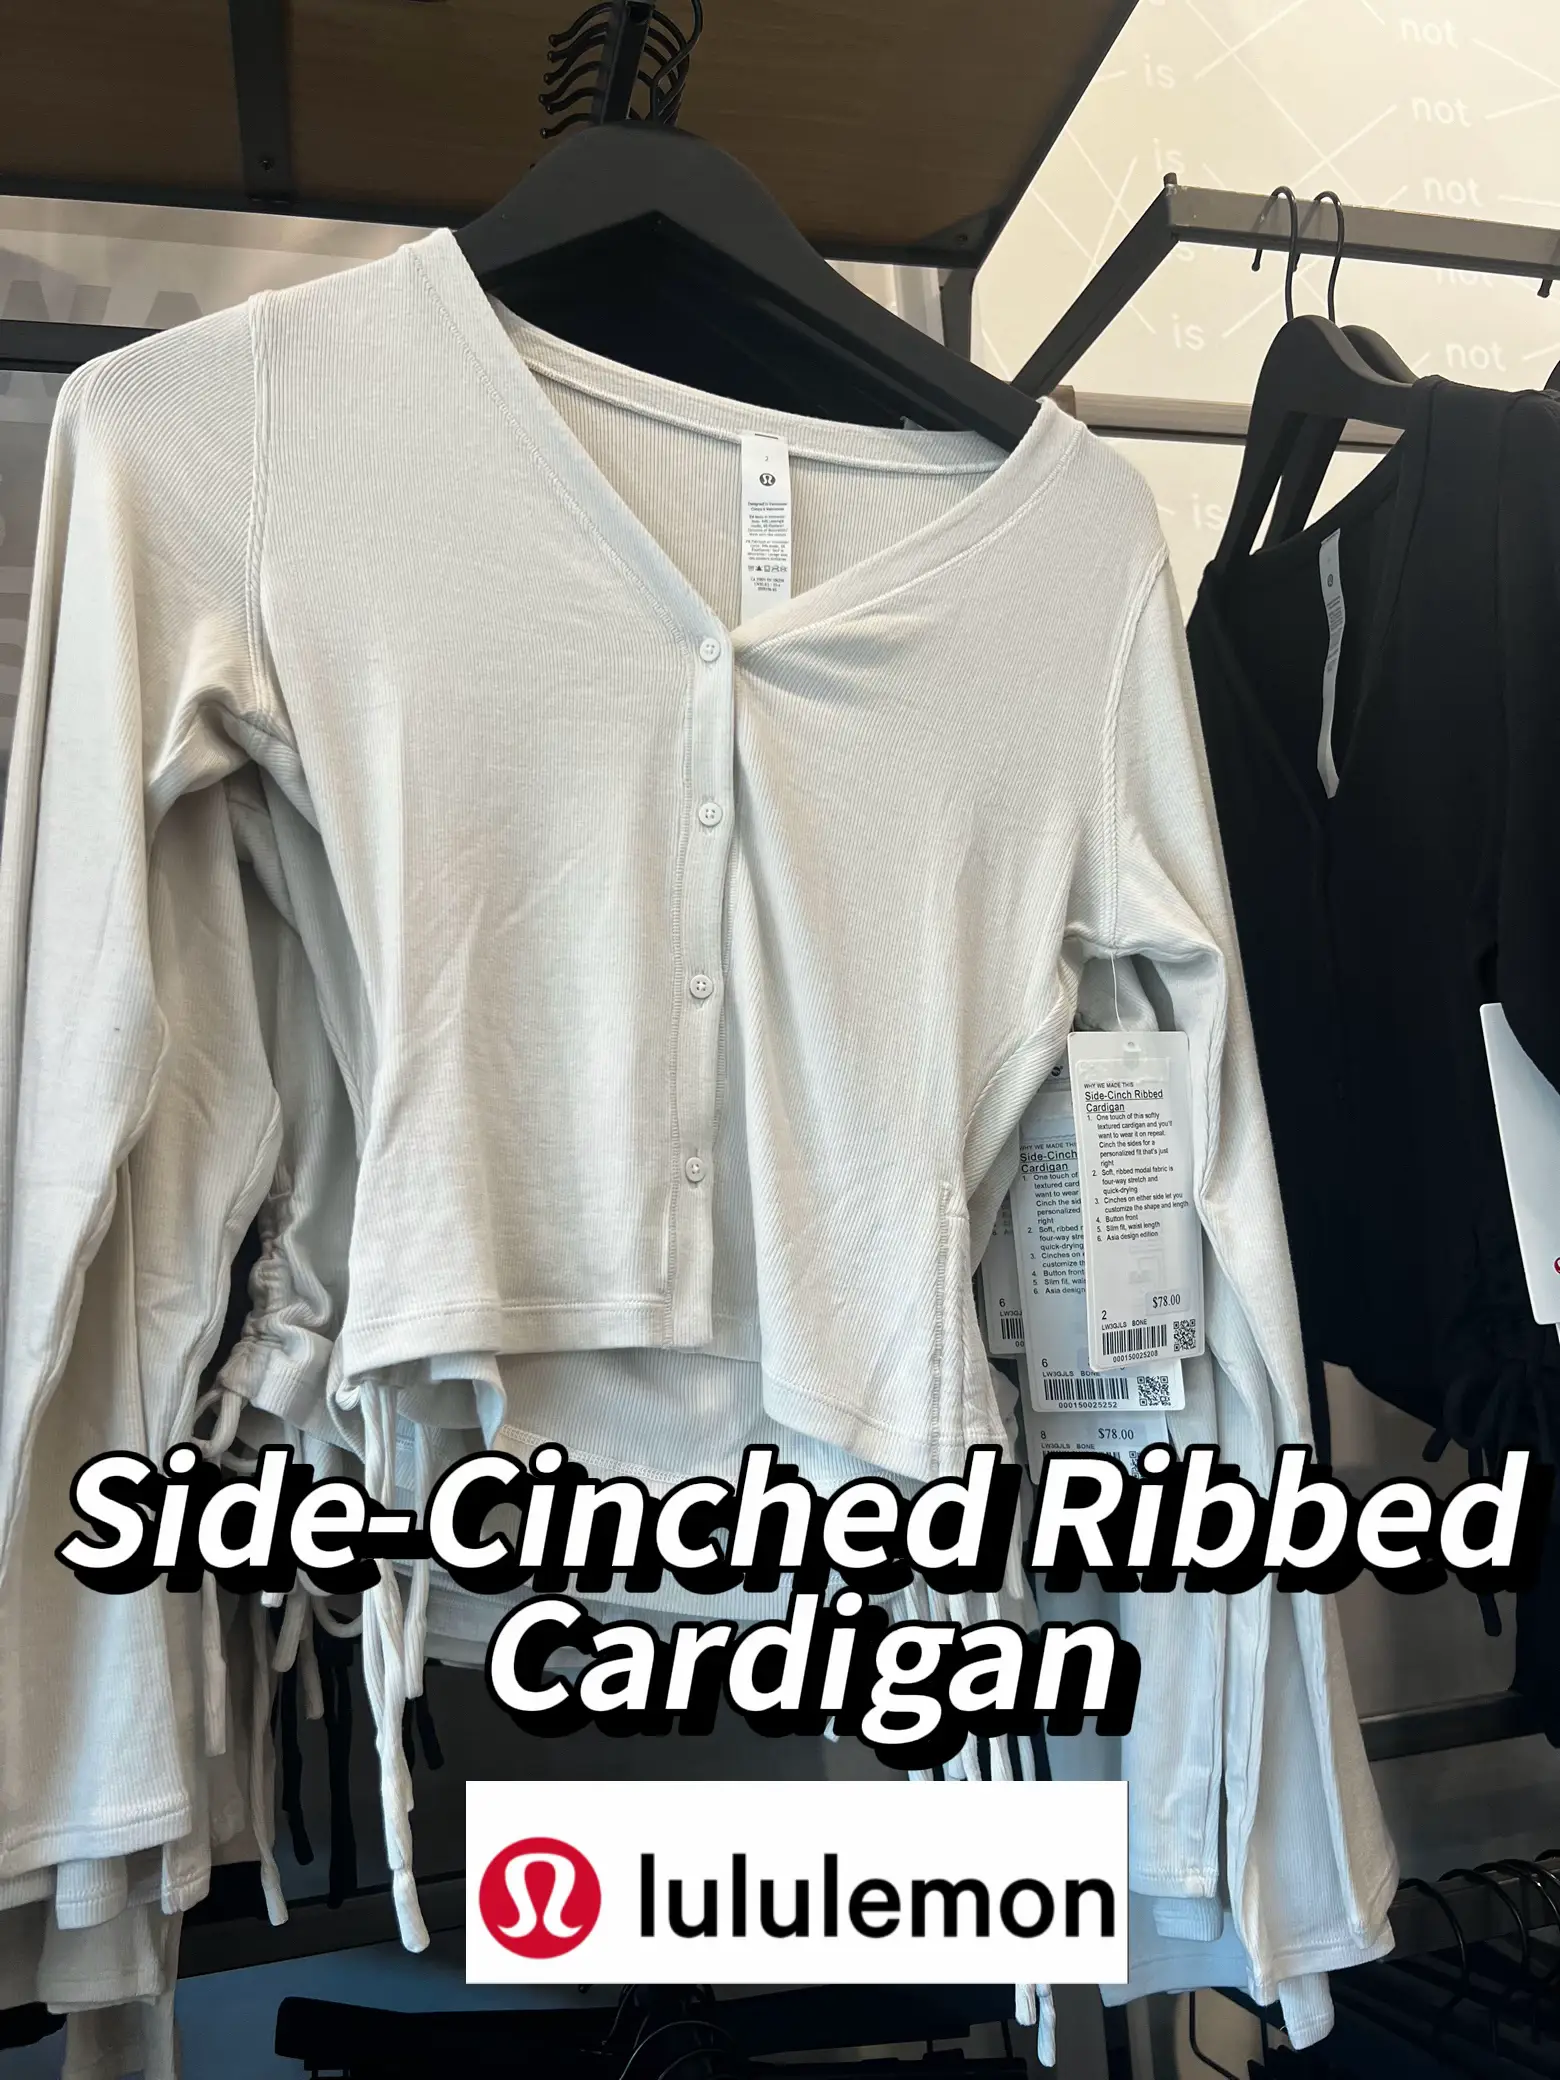 Anyone wear the side-cinch cardigan for exercise? : r/lululemon